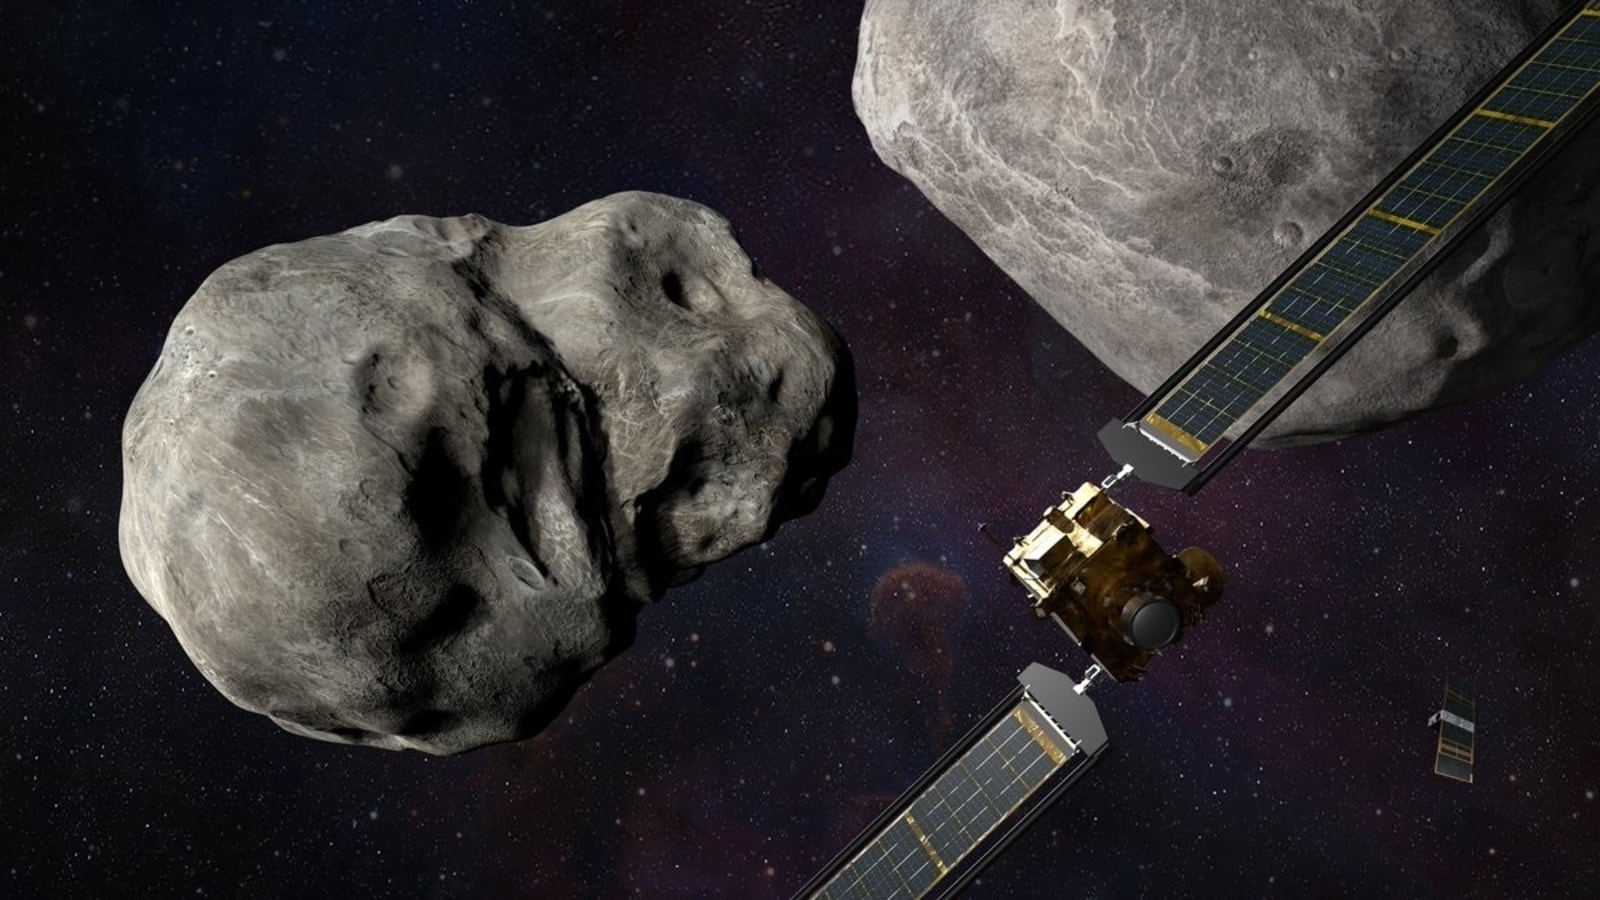 NASA DART Mission LIVE! Watch as spacecraft collides with asteroid - HT Tech